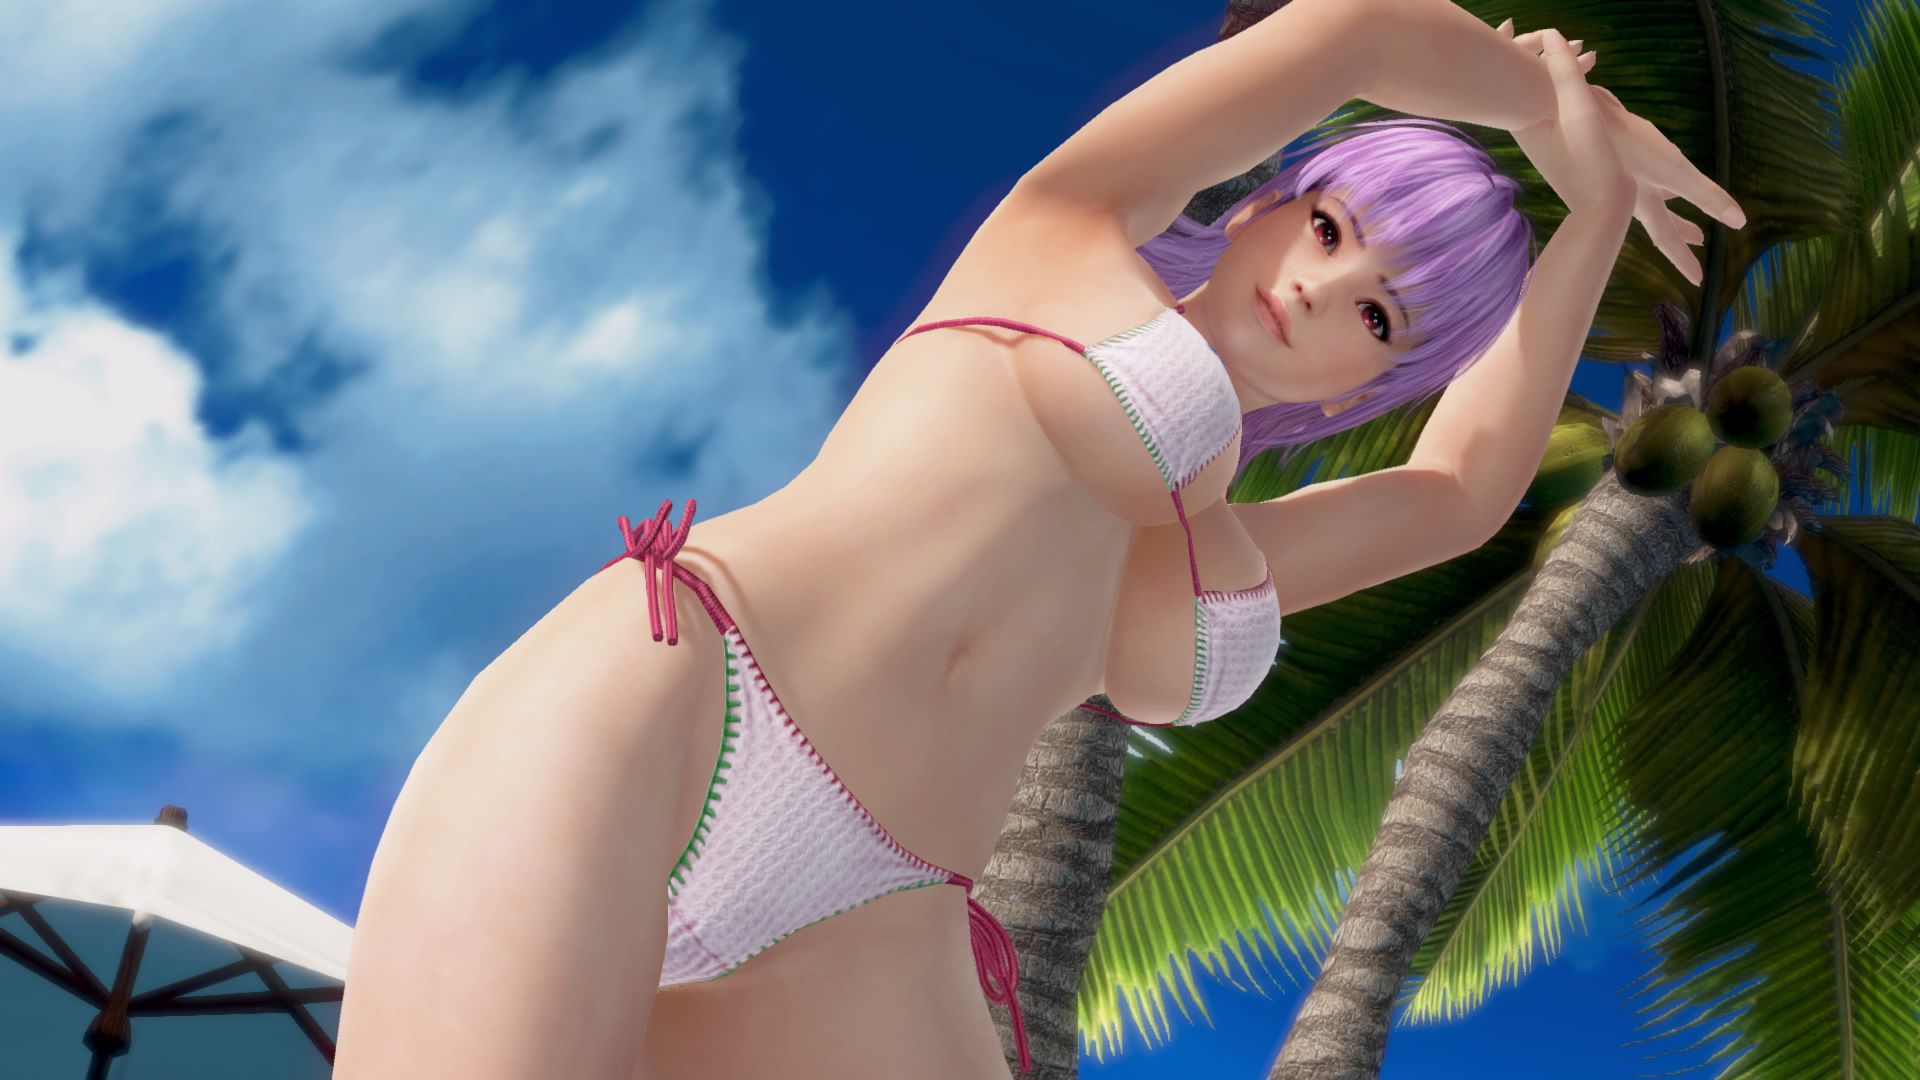 Doax3 "The color which suits the Aya-chan is pink" theory is verified 9